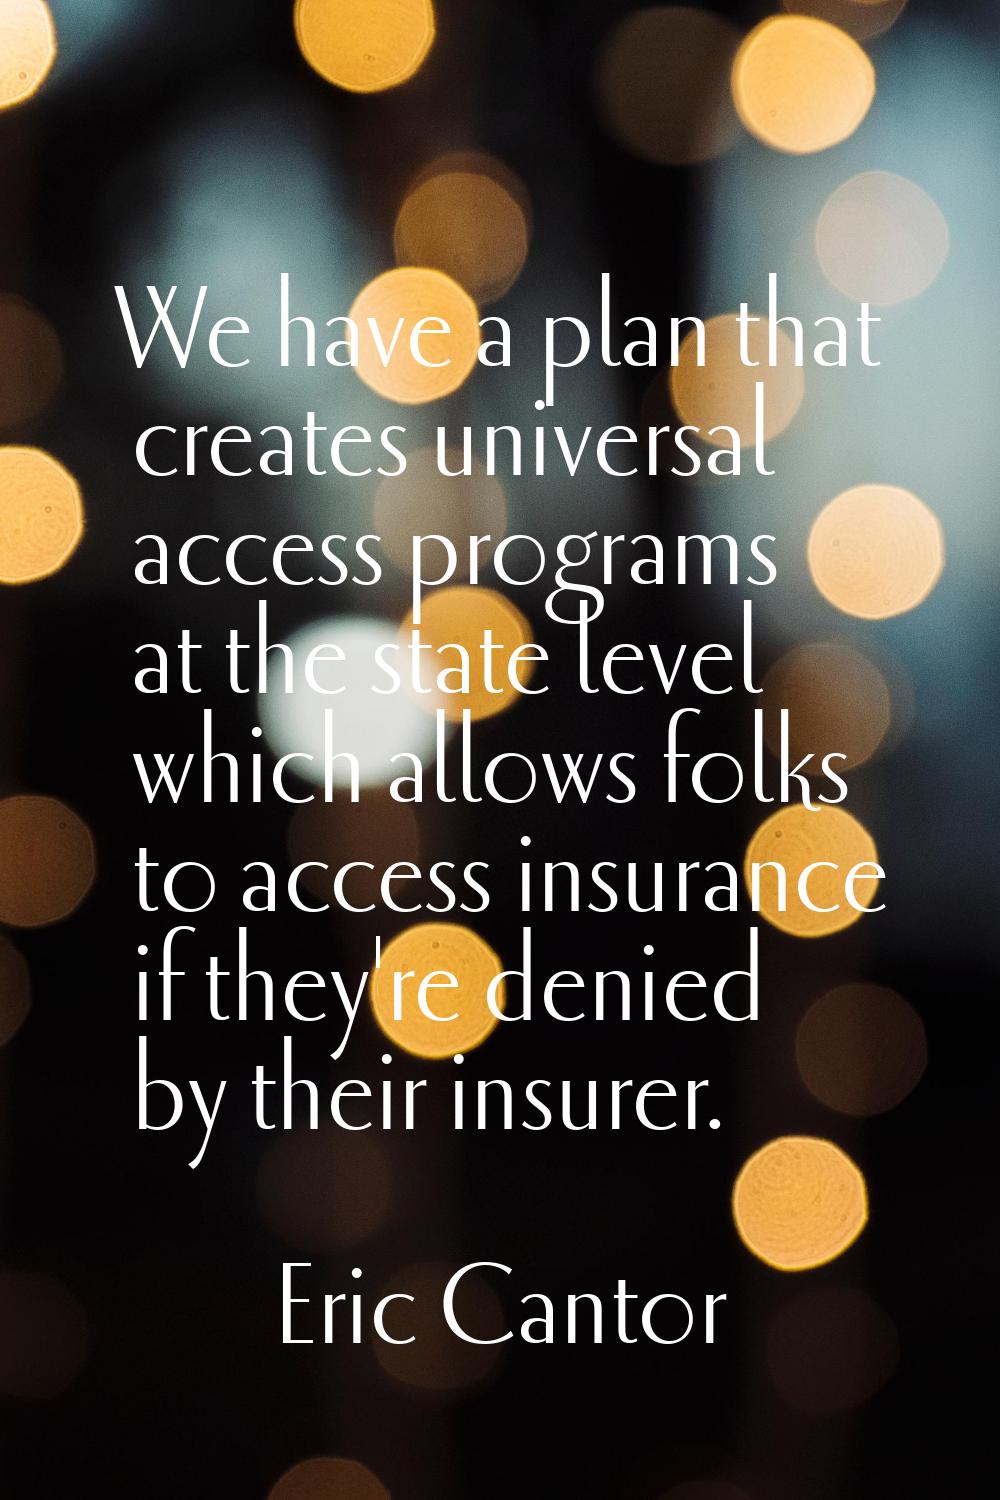 We have a plan that creates universal access programs at the state level which allows folks to acce